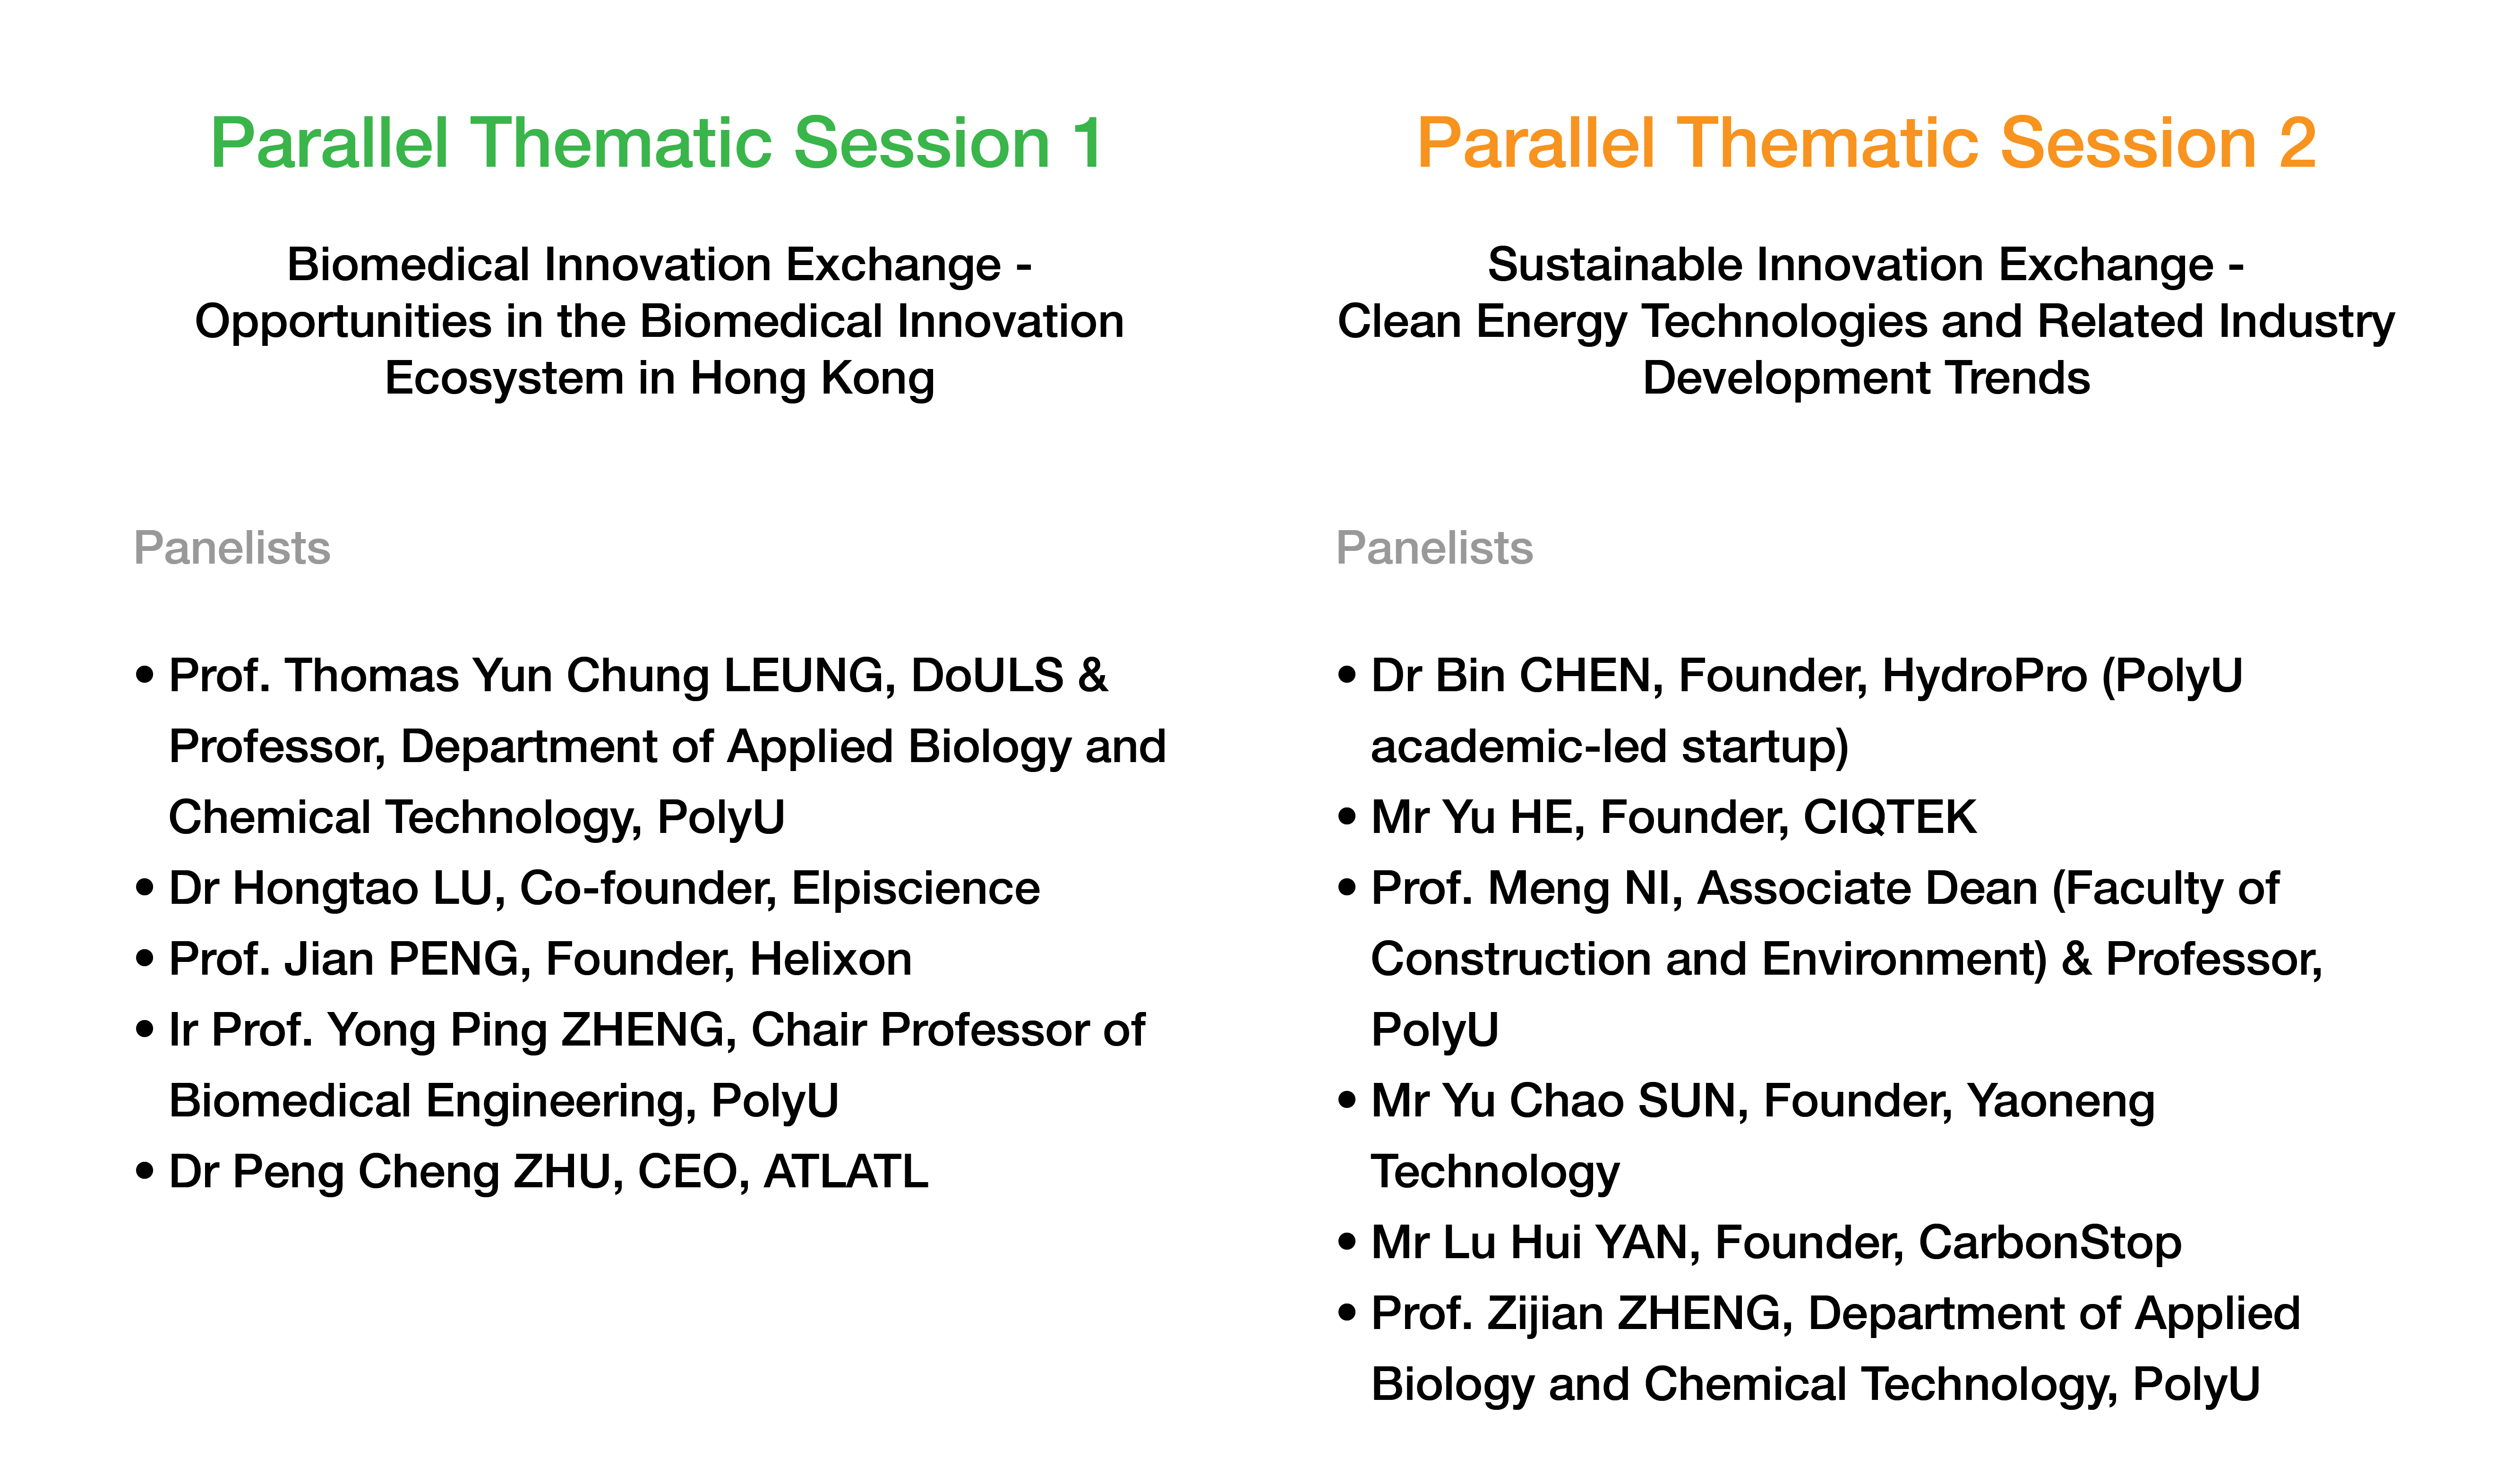 Parallel Thematic Session 2